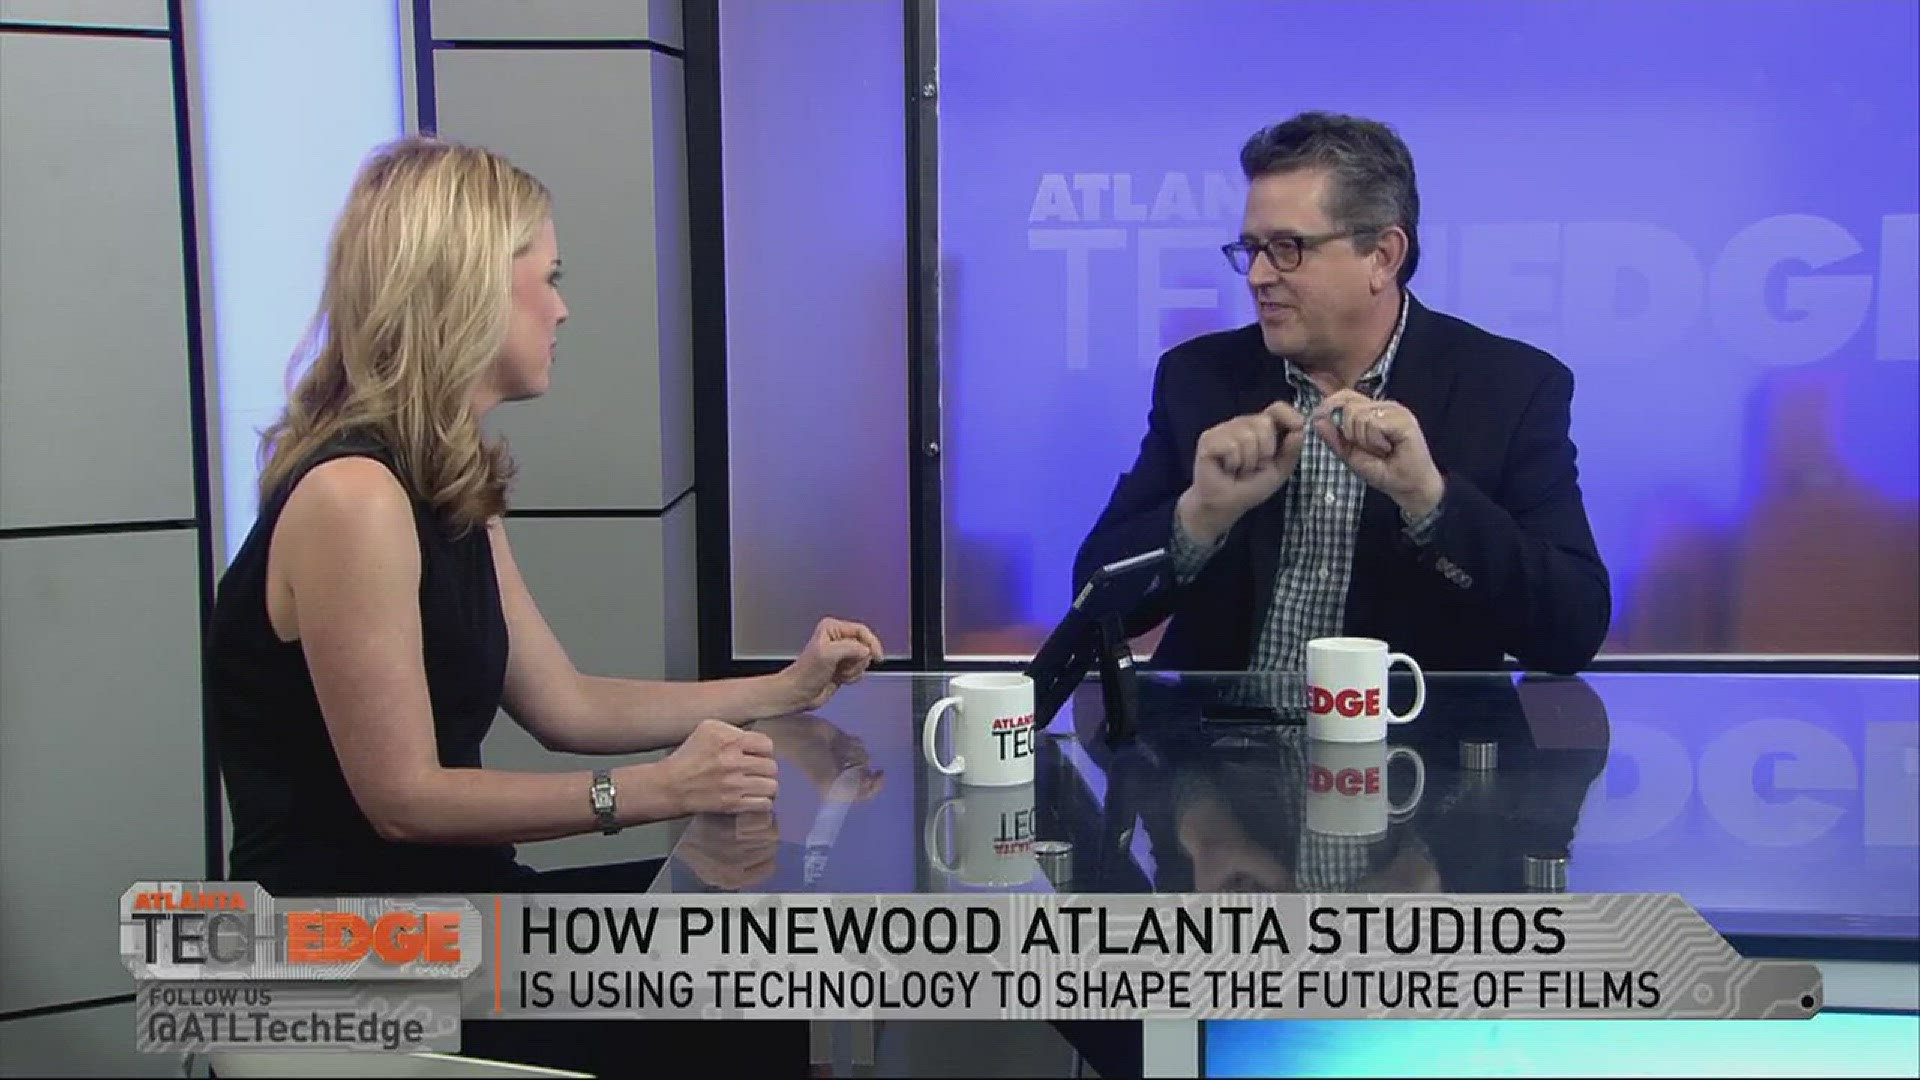 Frank Patterson, President of Pinewood Atlanta Studios, discusses Technology in the film-making industry